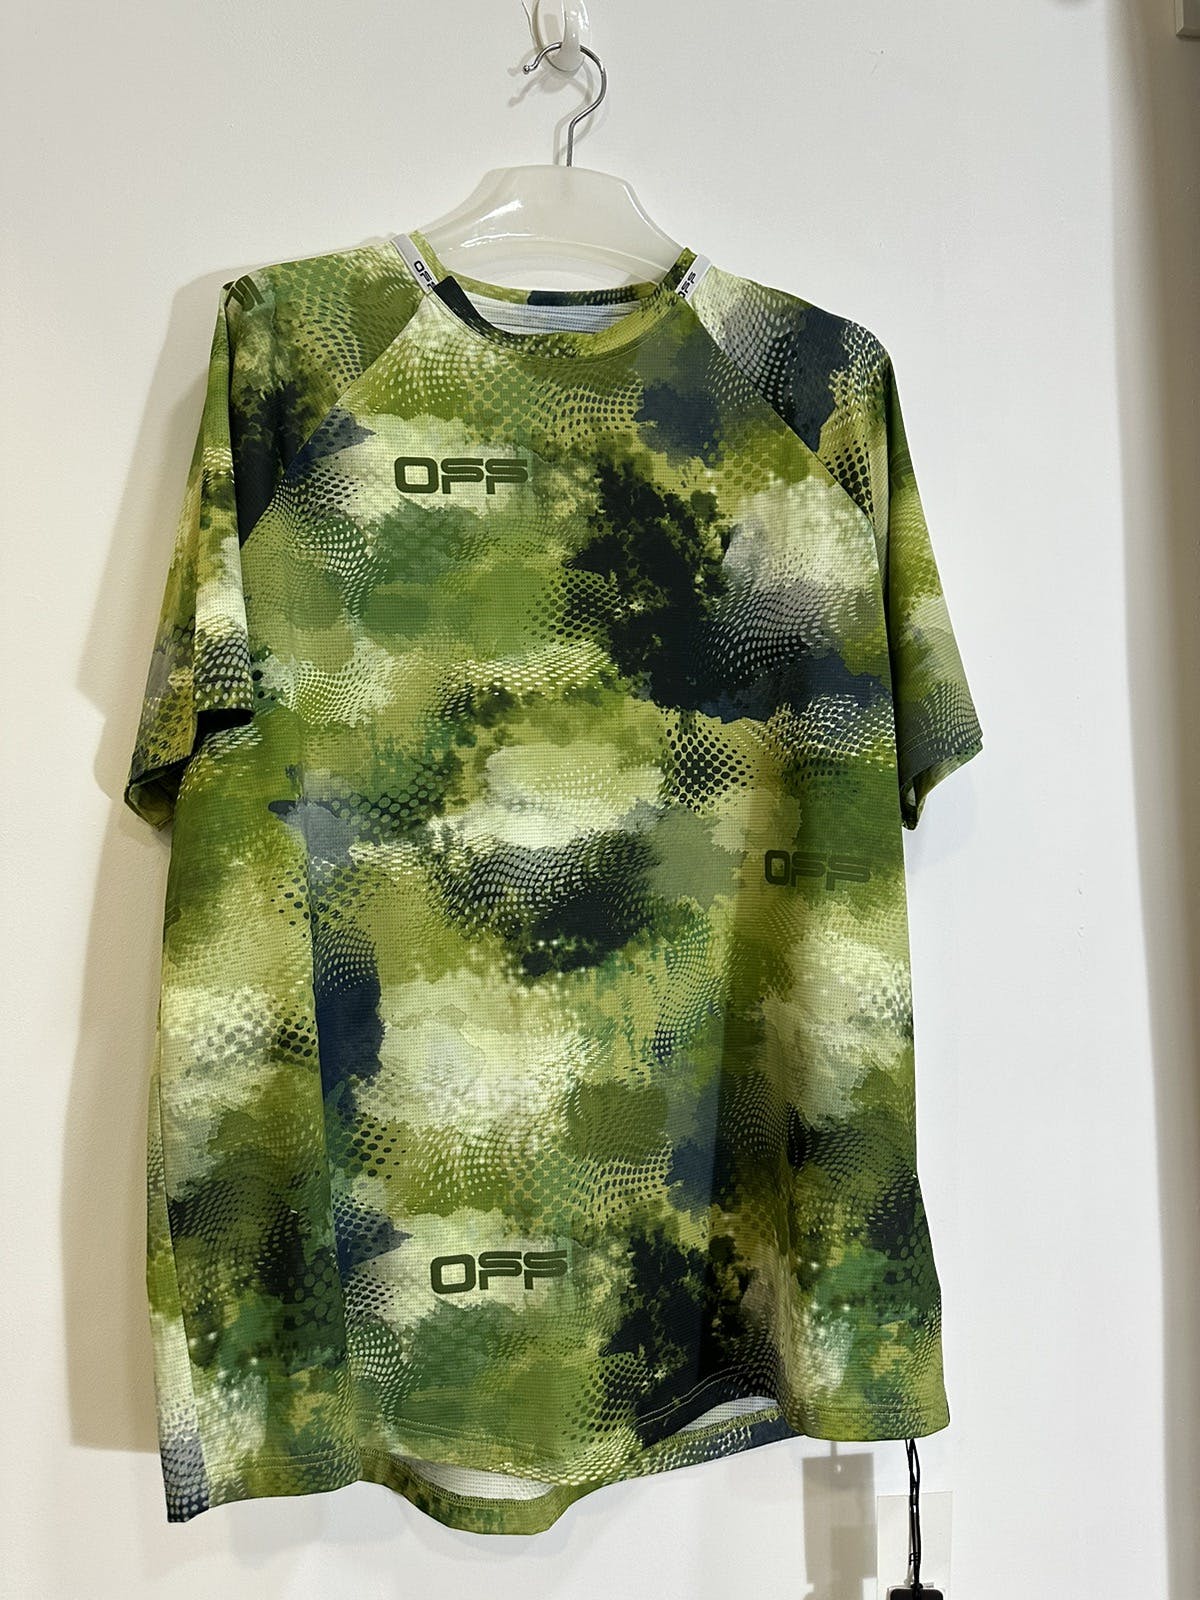 Off White Active Camo Print Jersey - 5